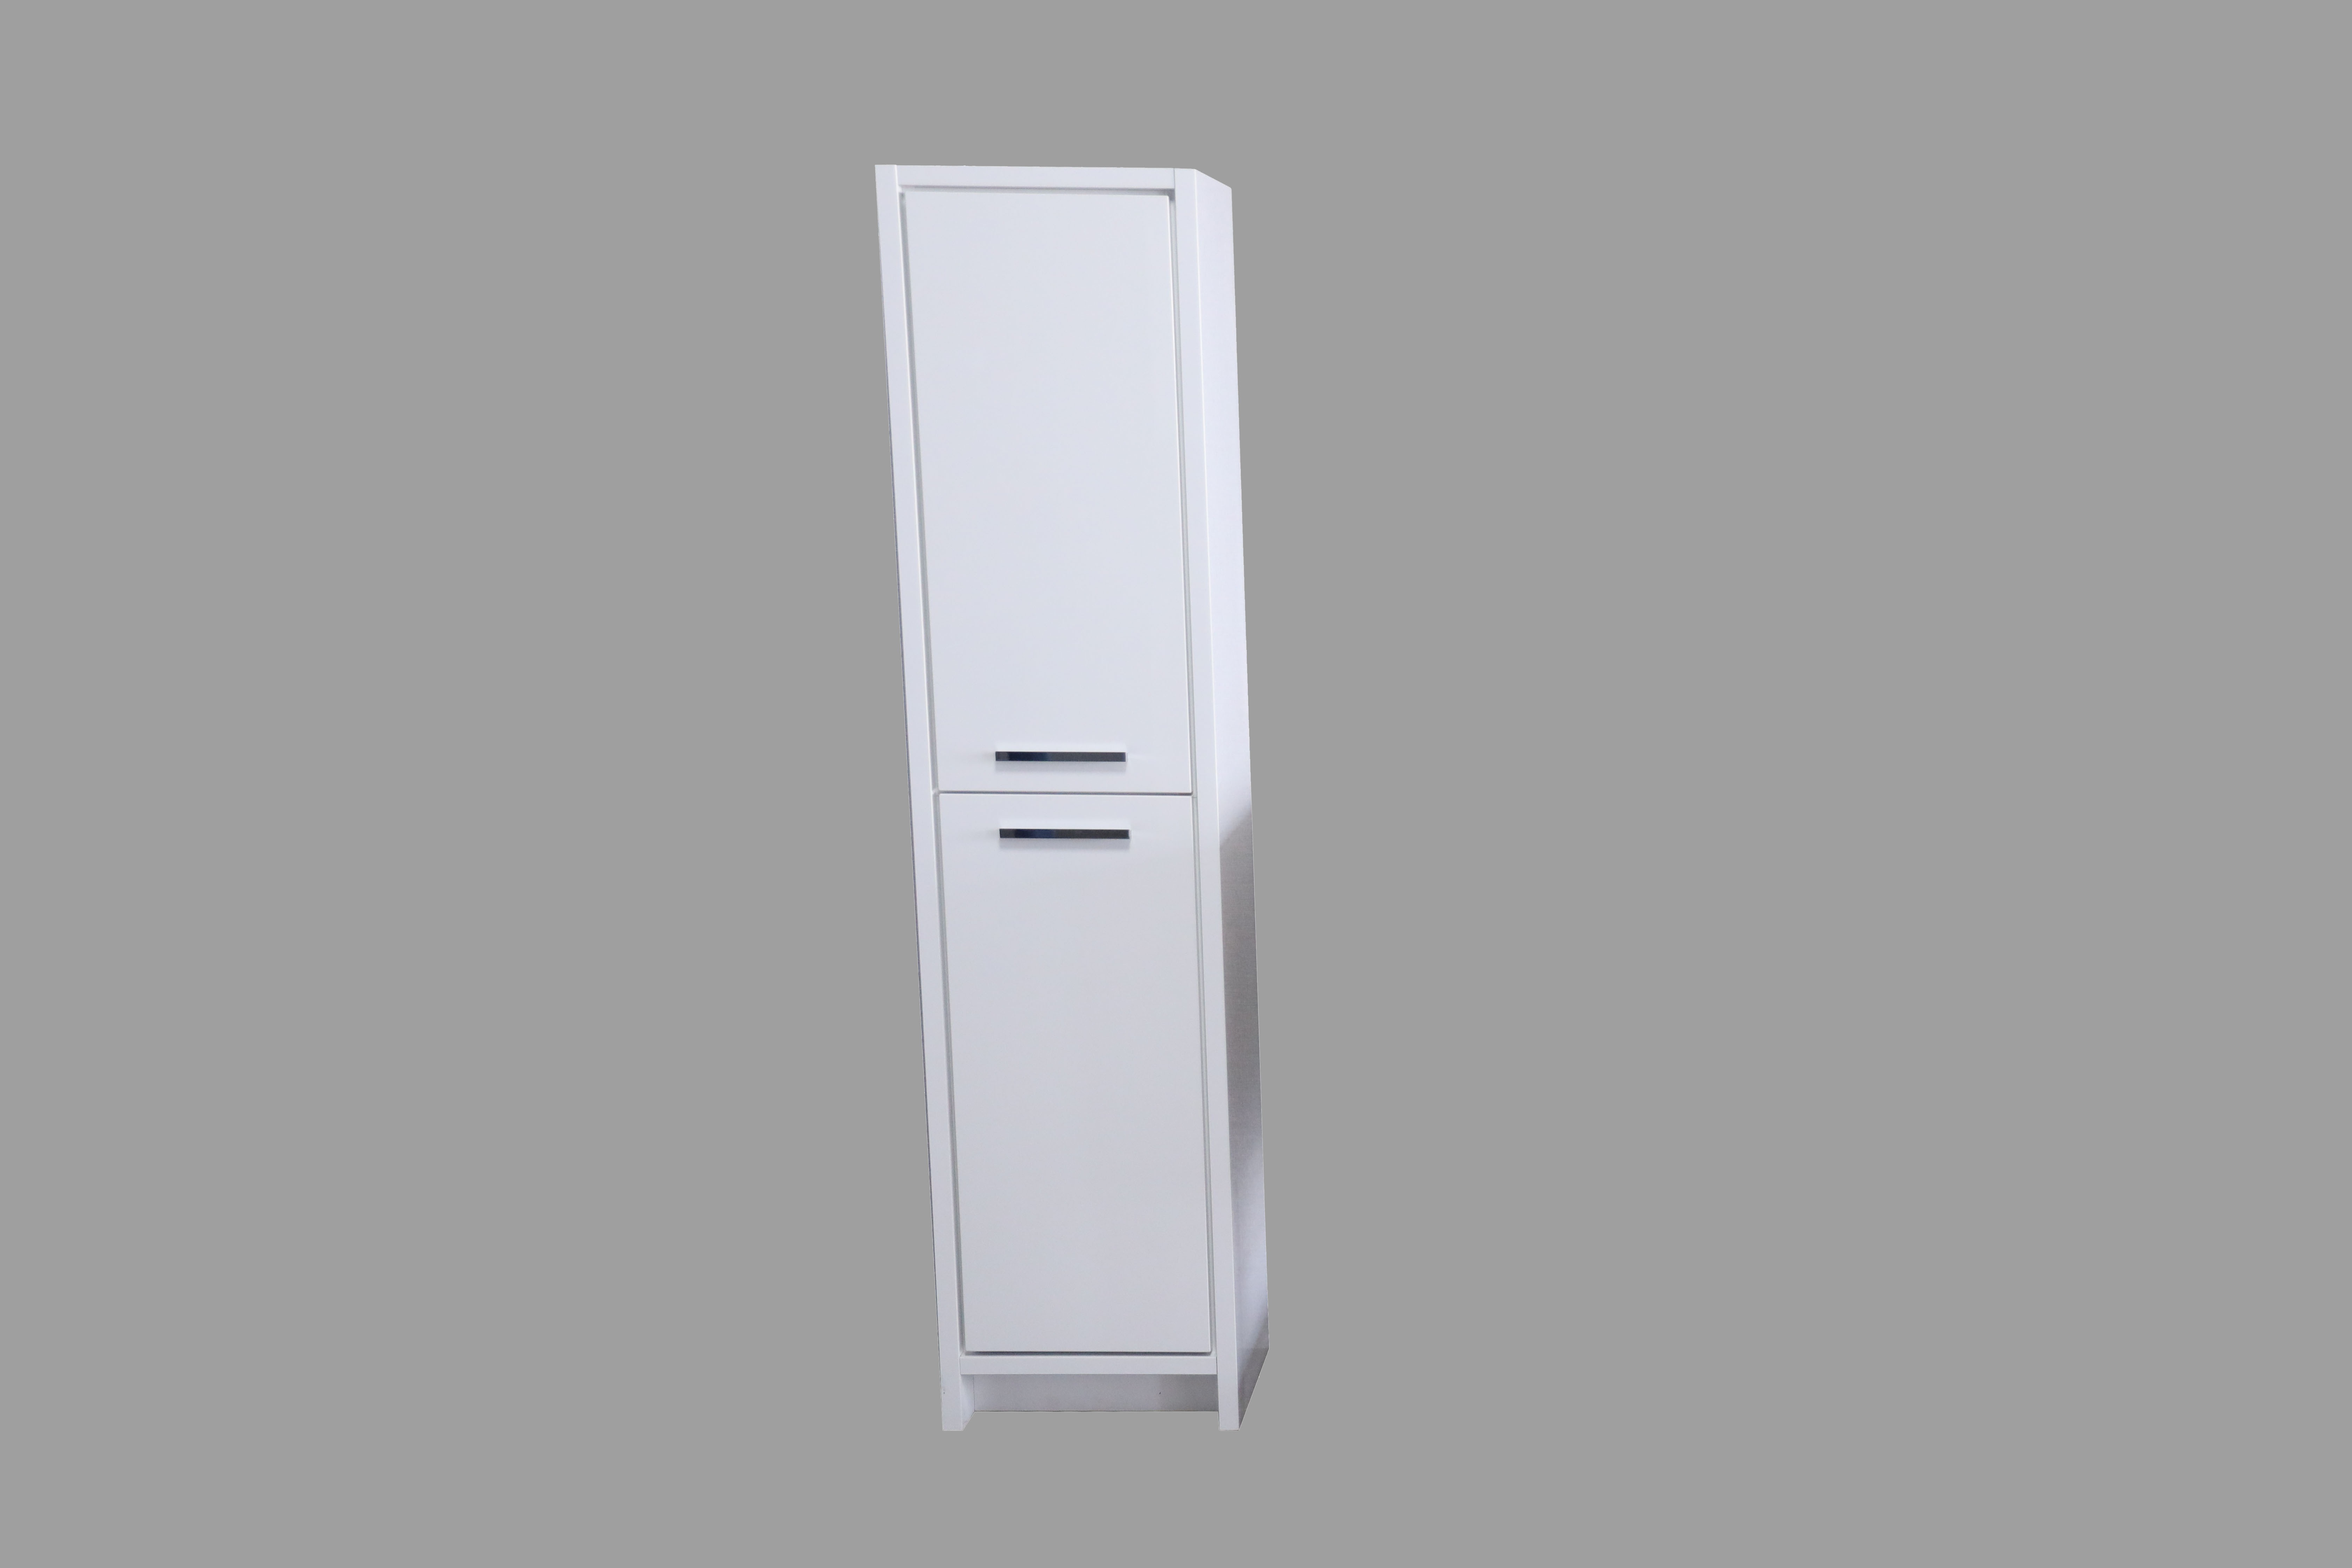 2-door floor standing high storage cabinet with chrome-plated handles Featured Image